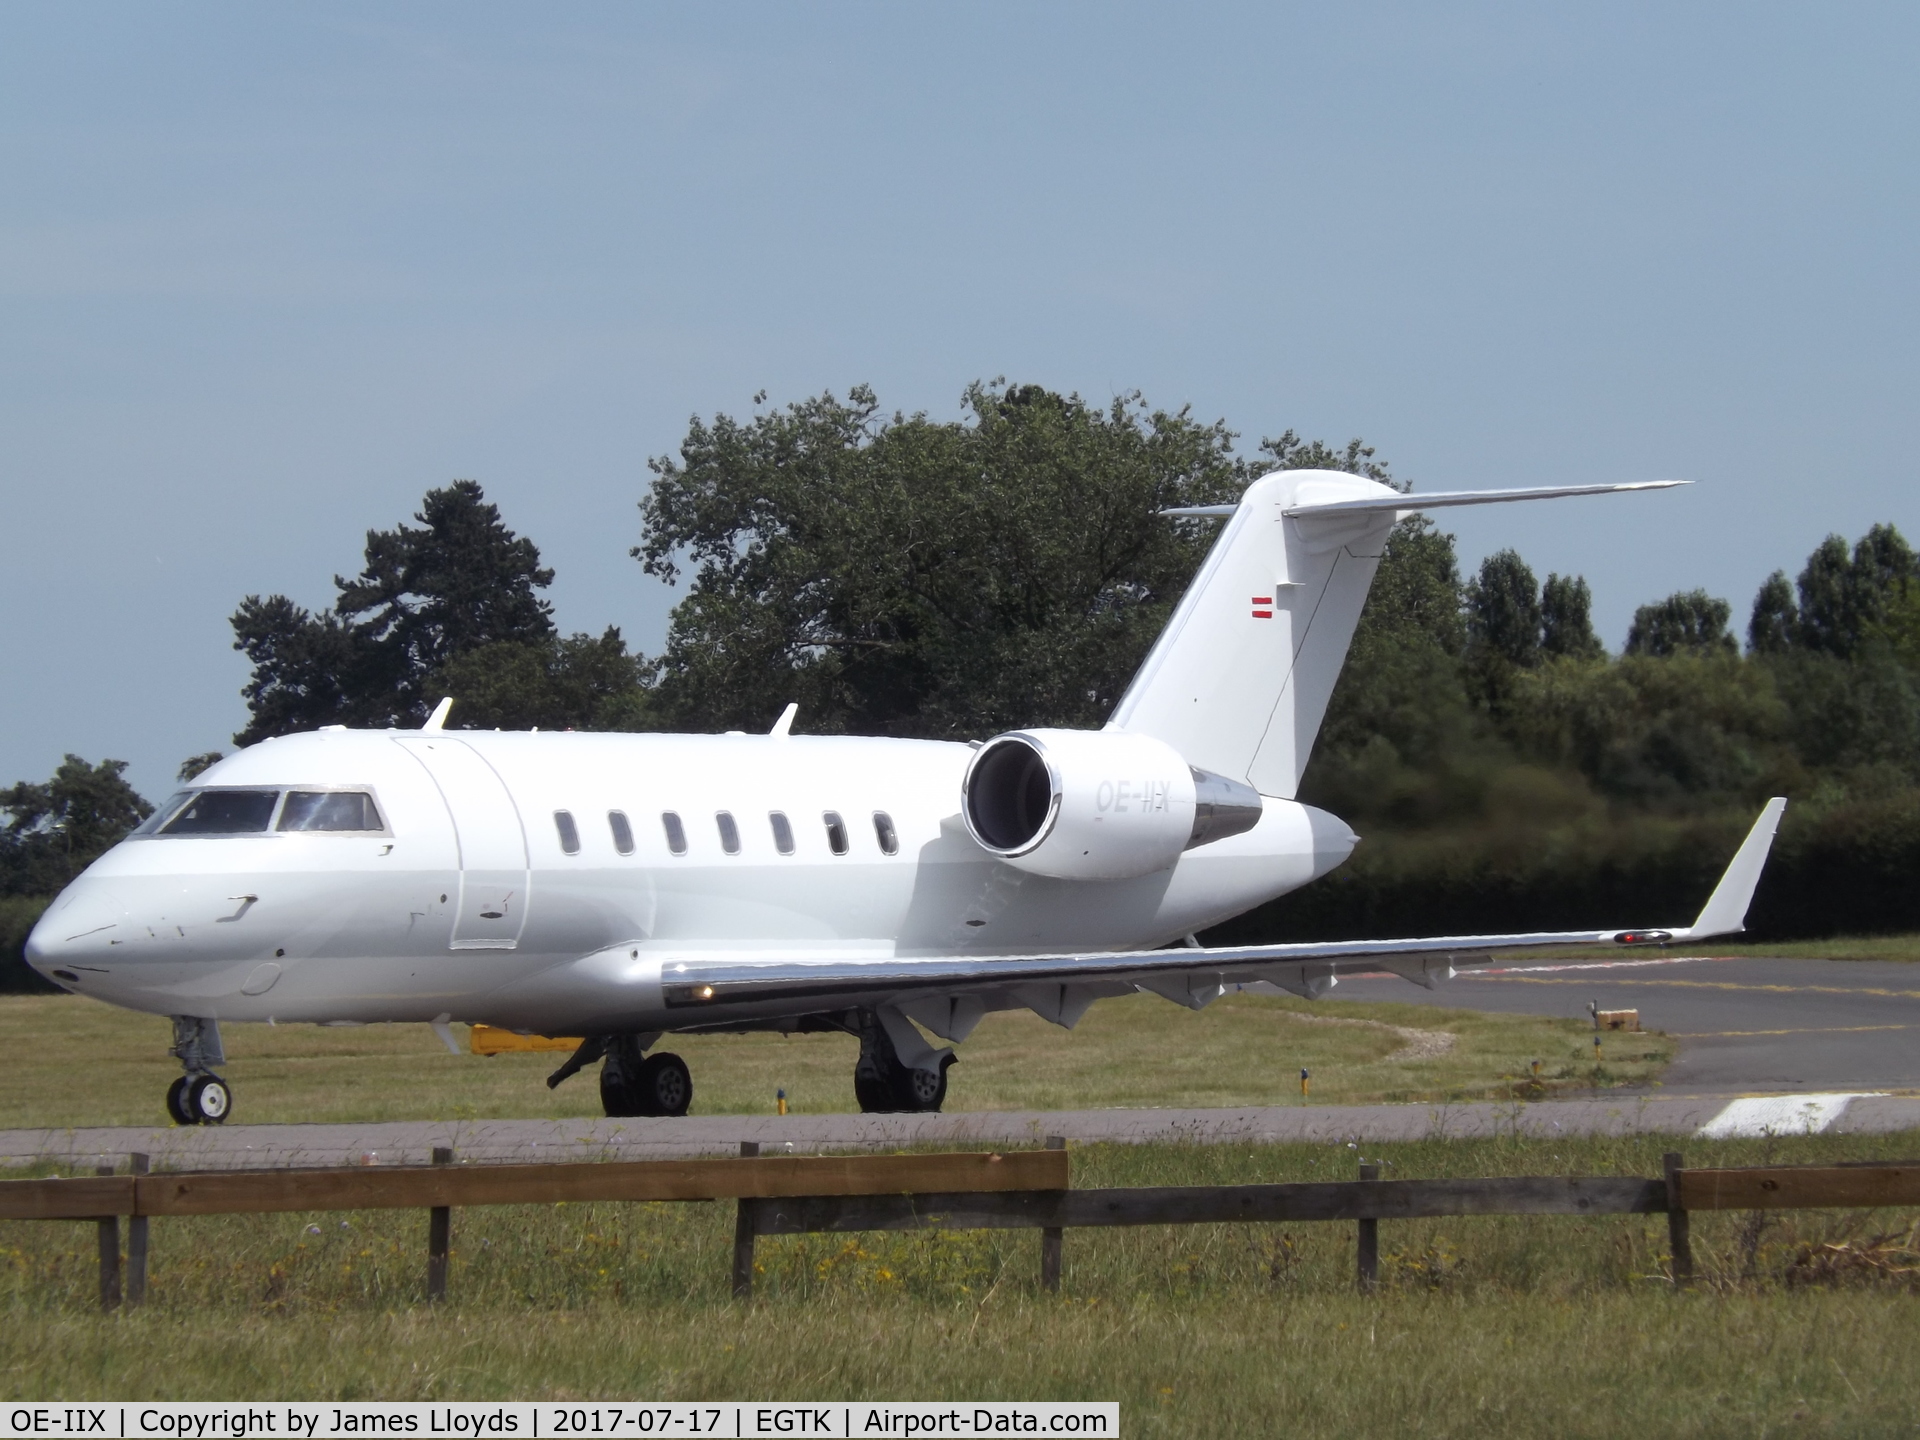 OE-IIX, 2010 Bombardier Challenger 605 (CL-600-2B16) C/N 5849, Just about to roll on take off at Oxford Airport.